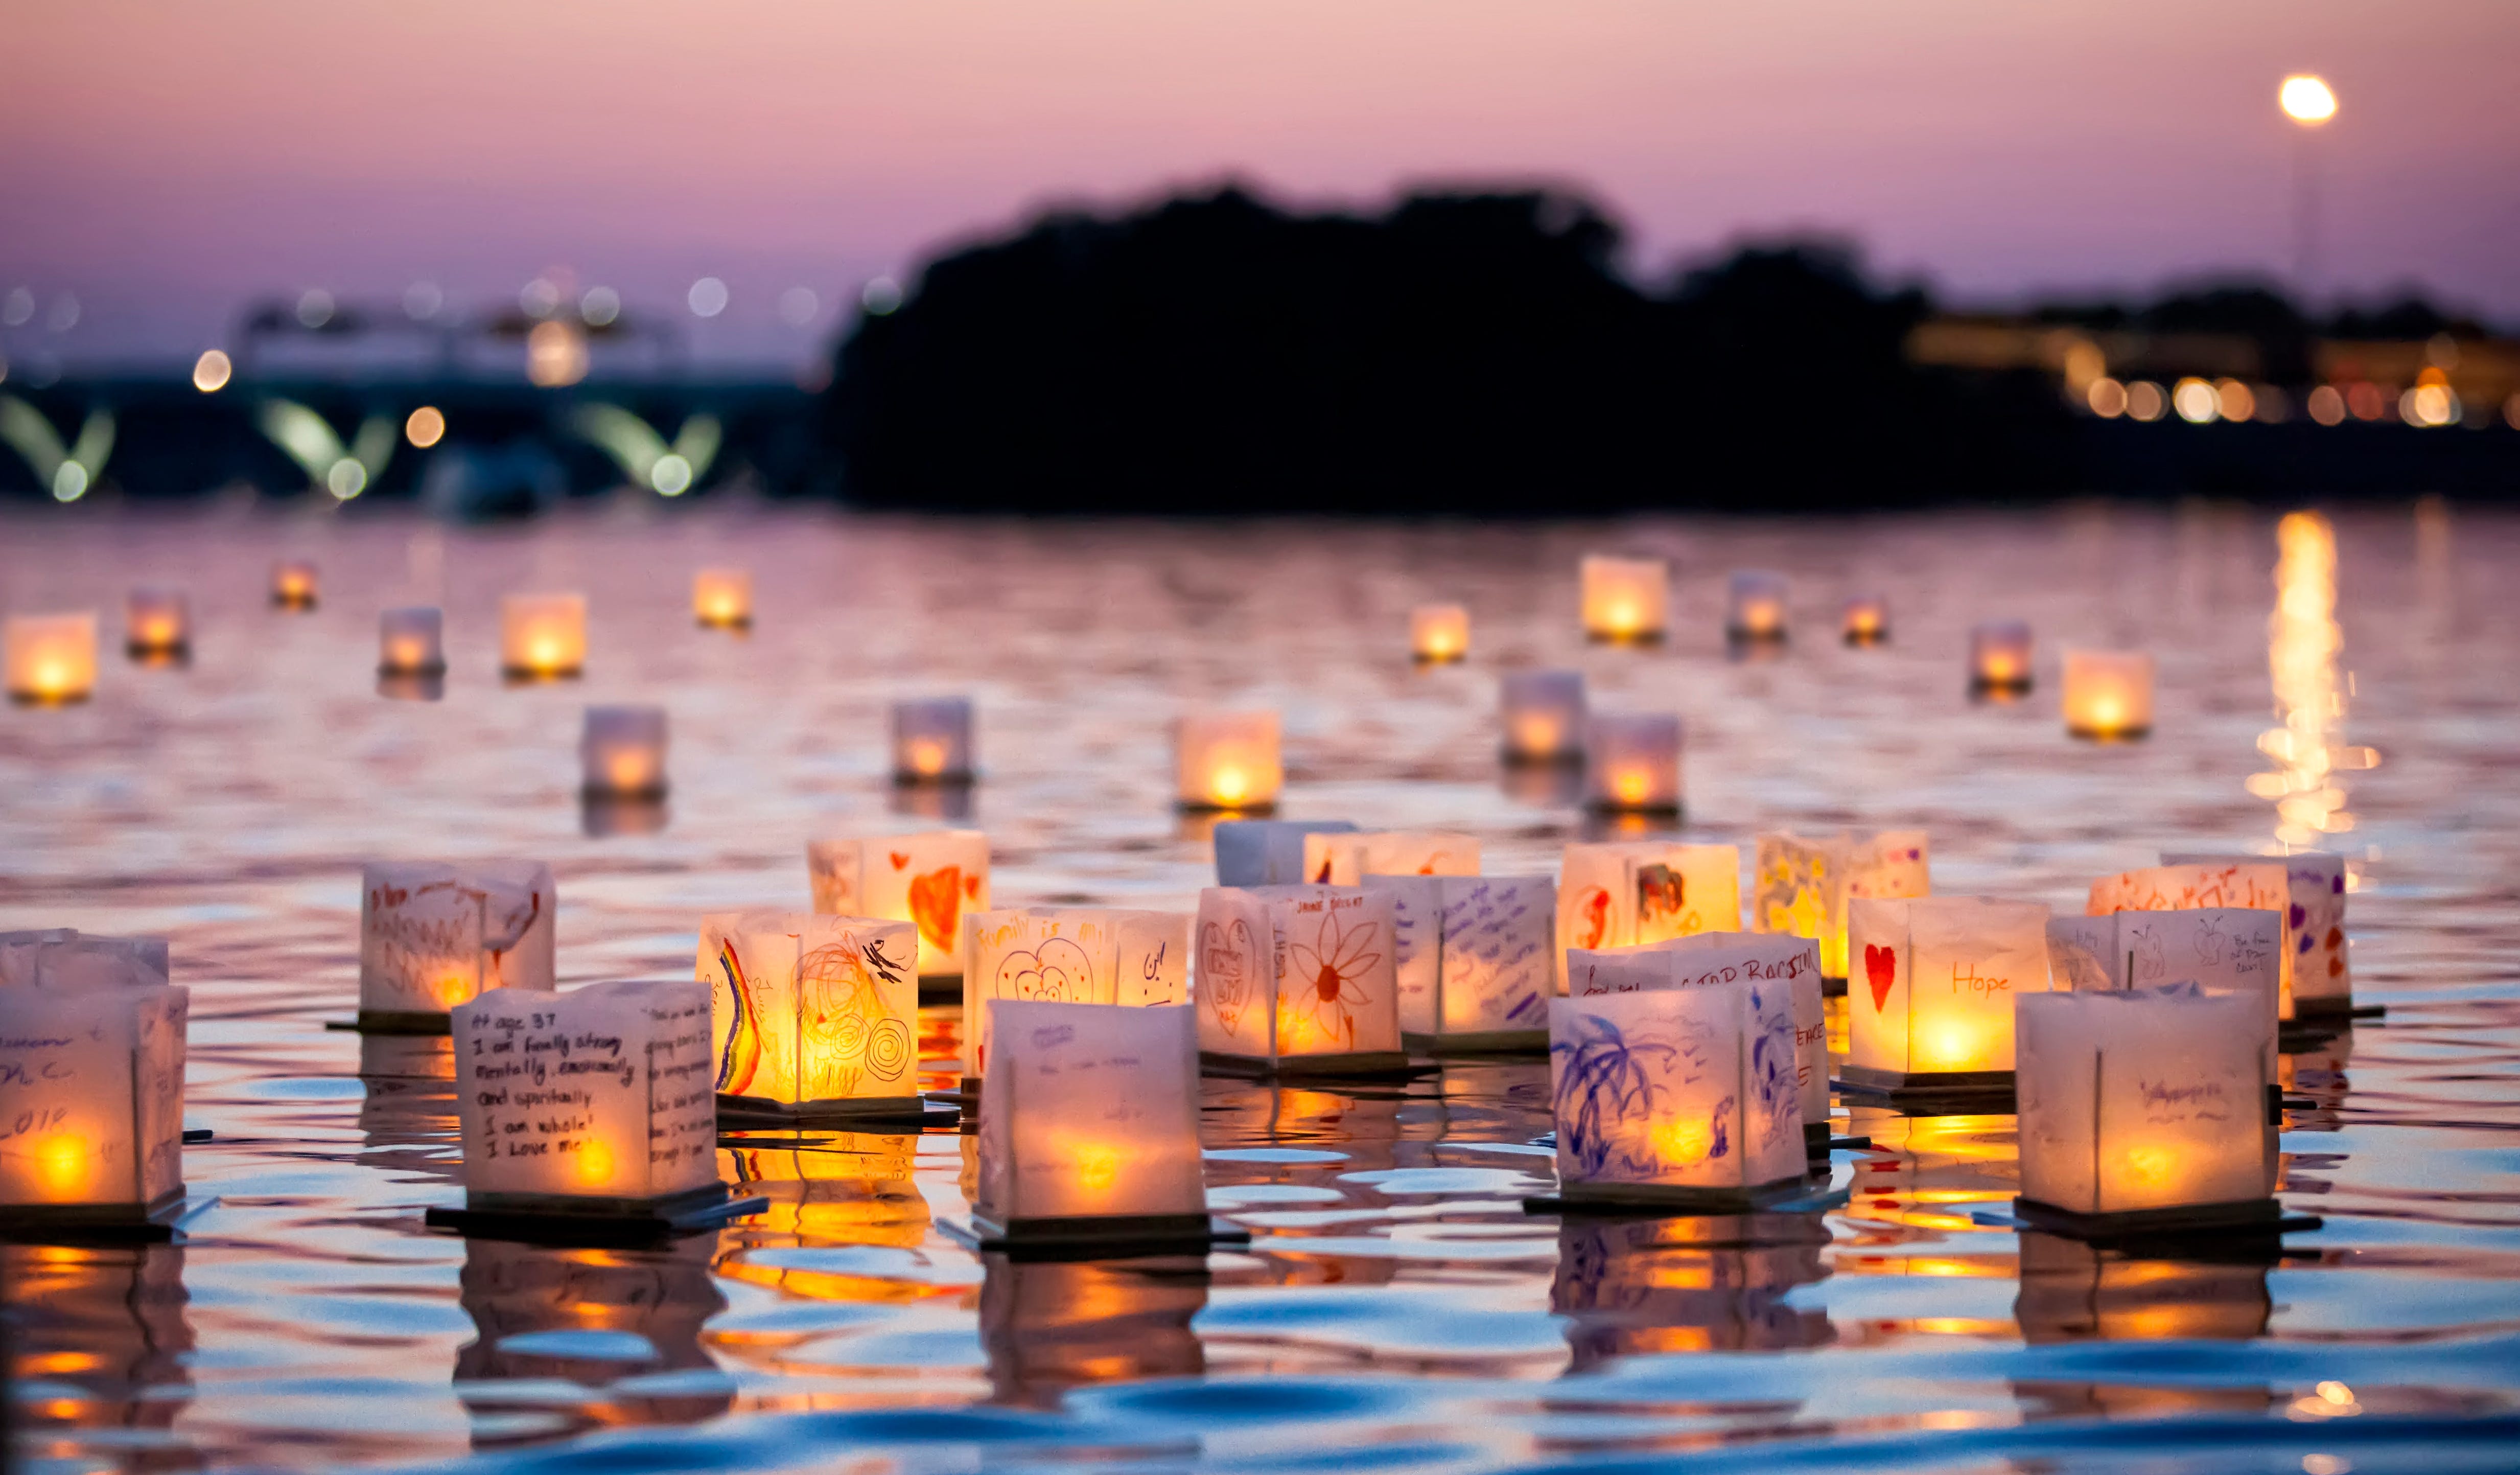 Why you should attend a Water Lantern Festival near you